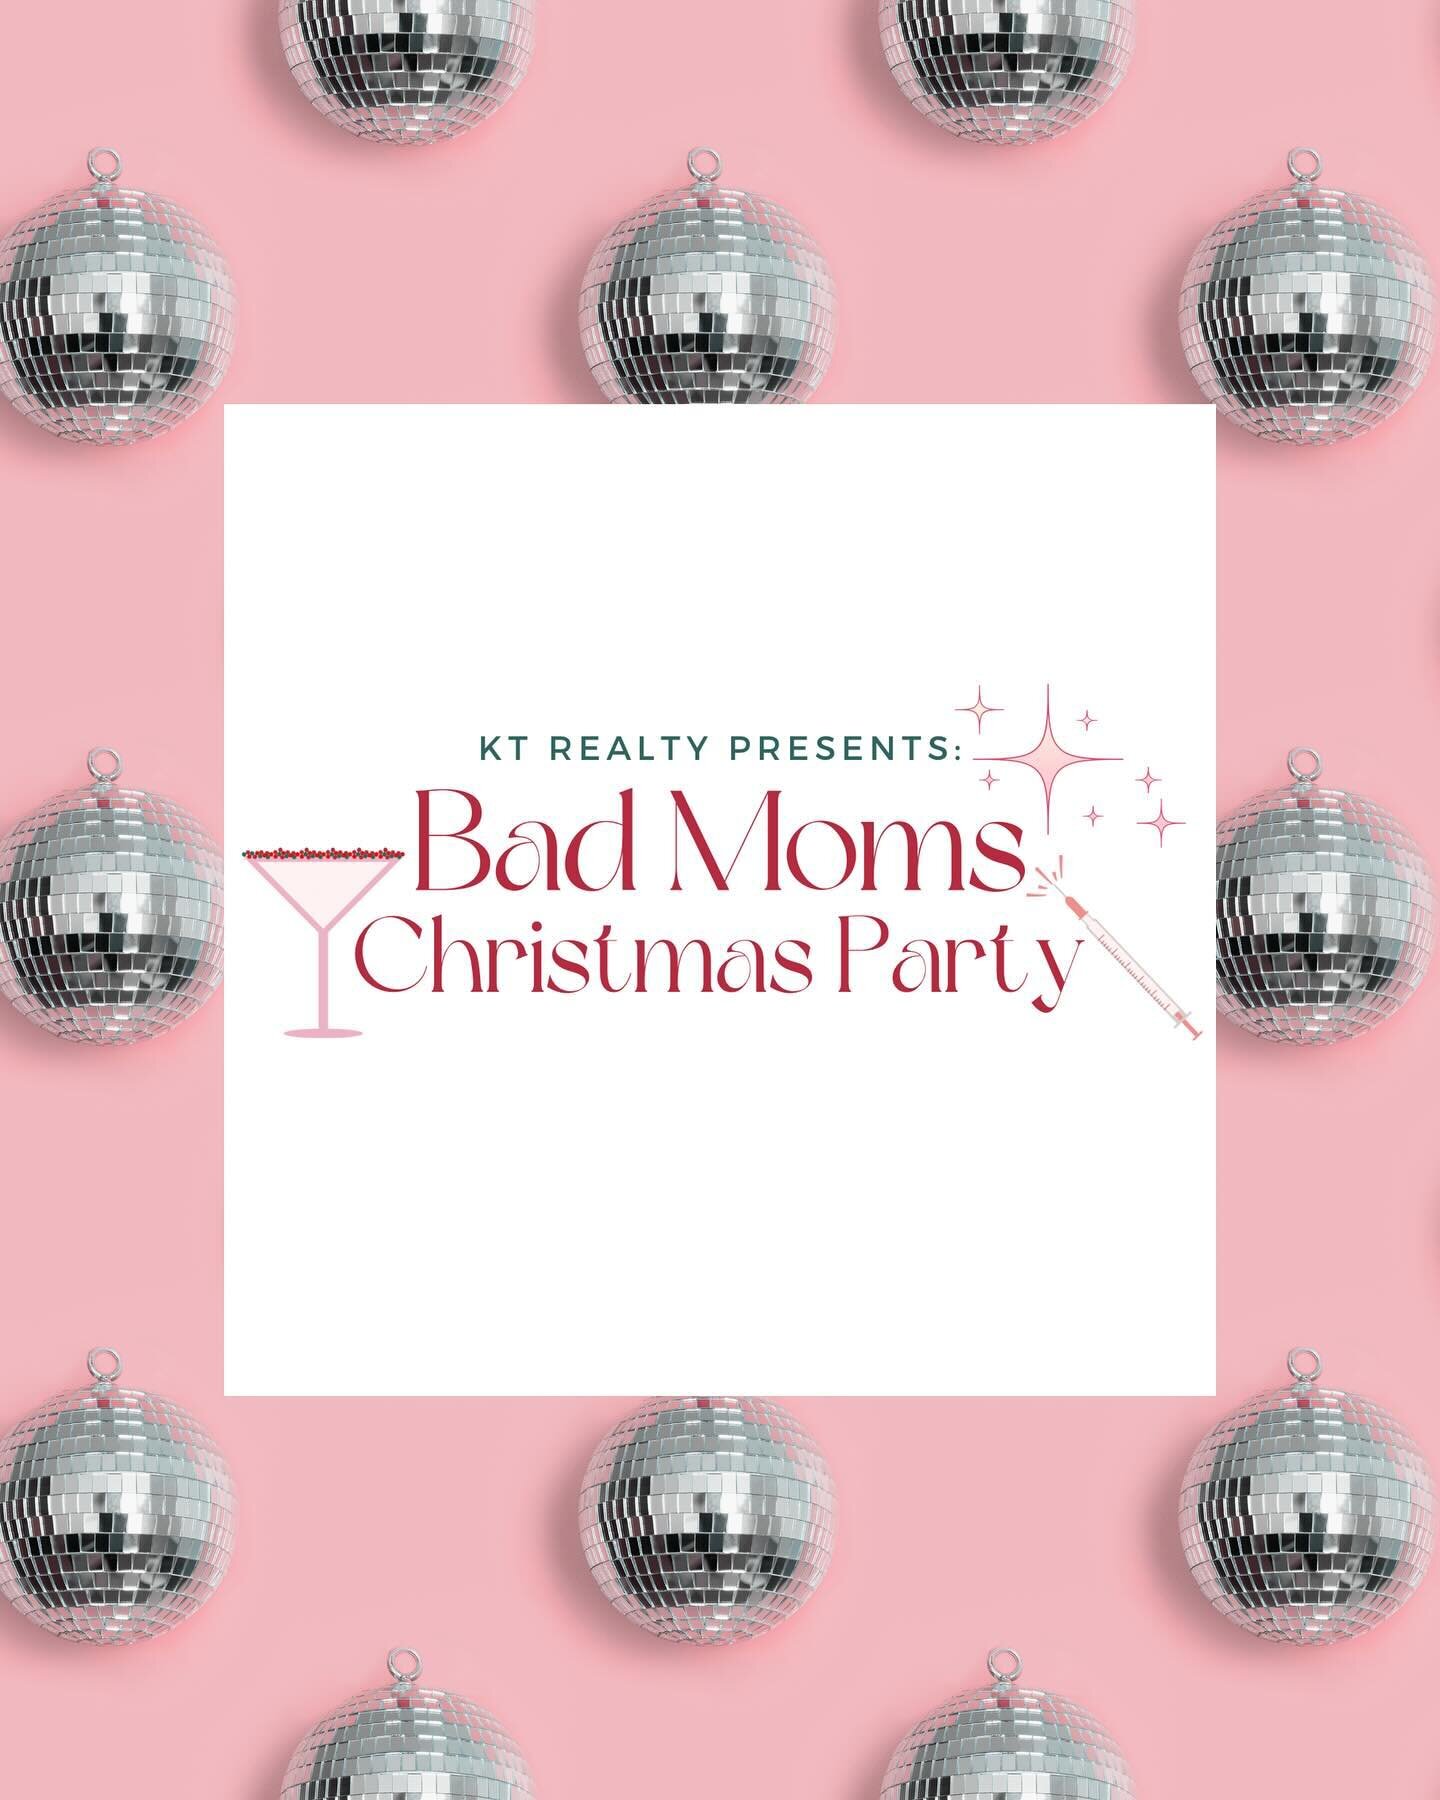 In lieu of the holiday season &amp; Christmas just one day away I wanted to share a recent project I completed for one of my clients this past month: Bad Moms Christmas Party!✨
The focus of this event was to create a fun + festive atmosphere exclusiv